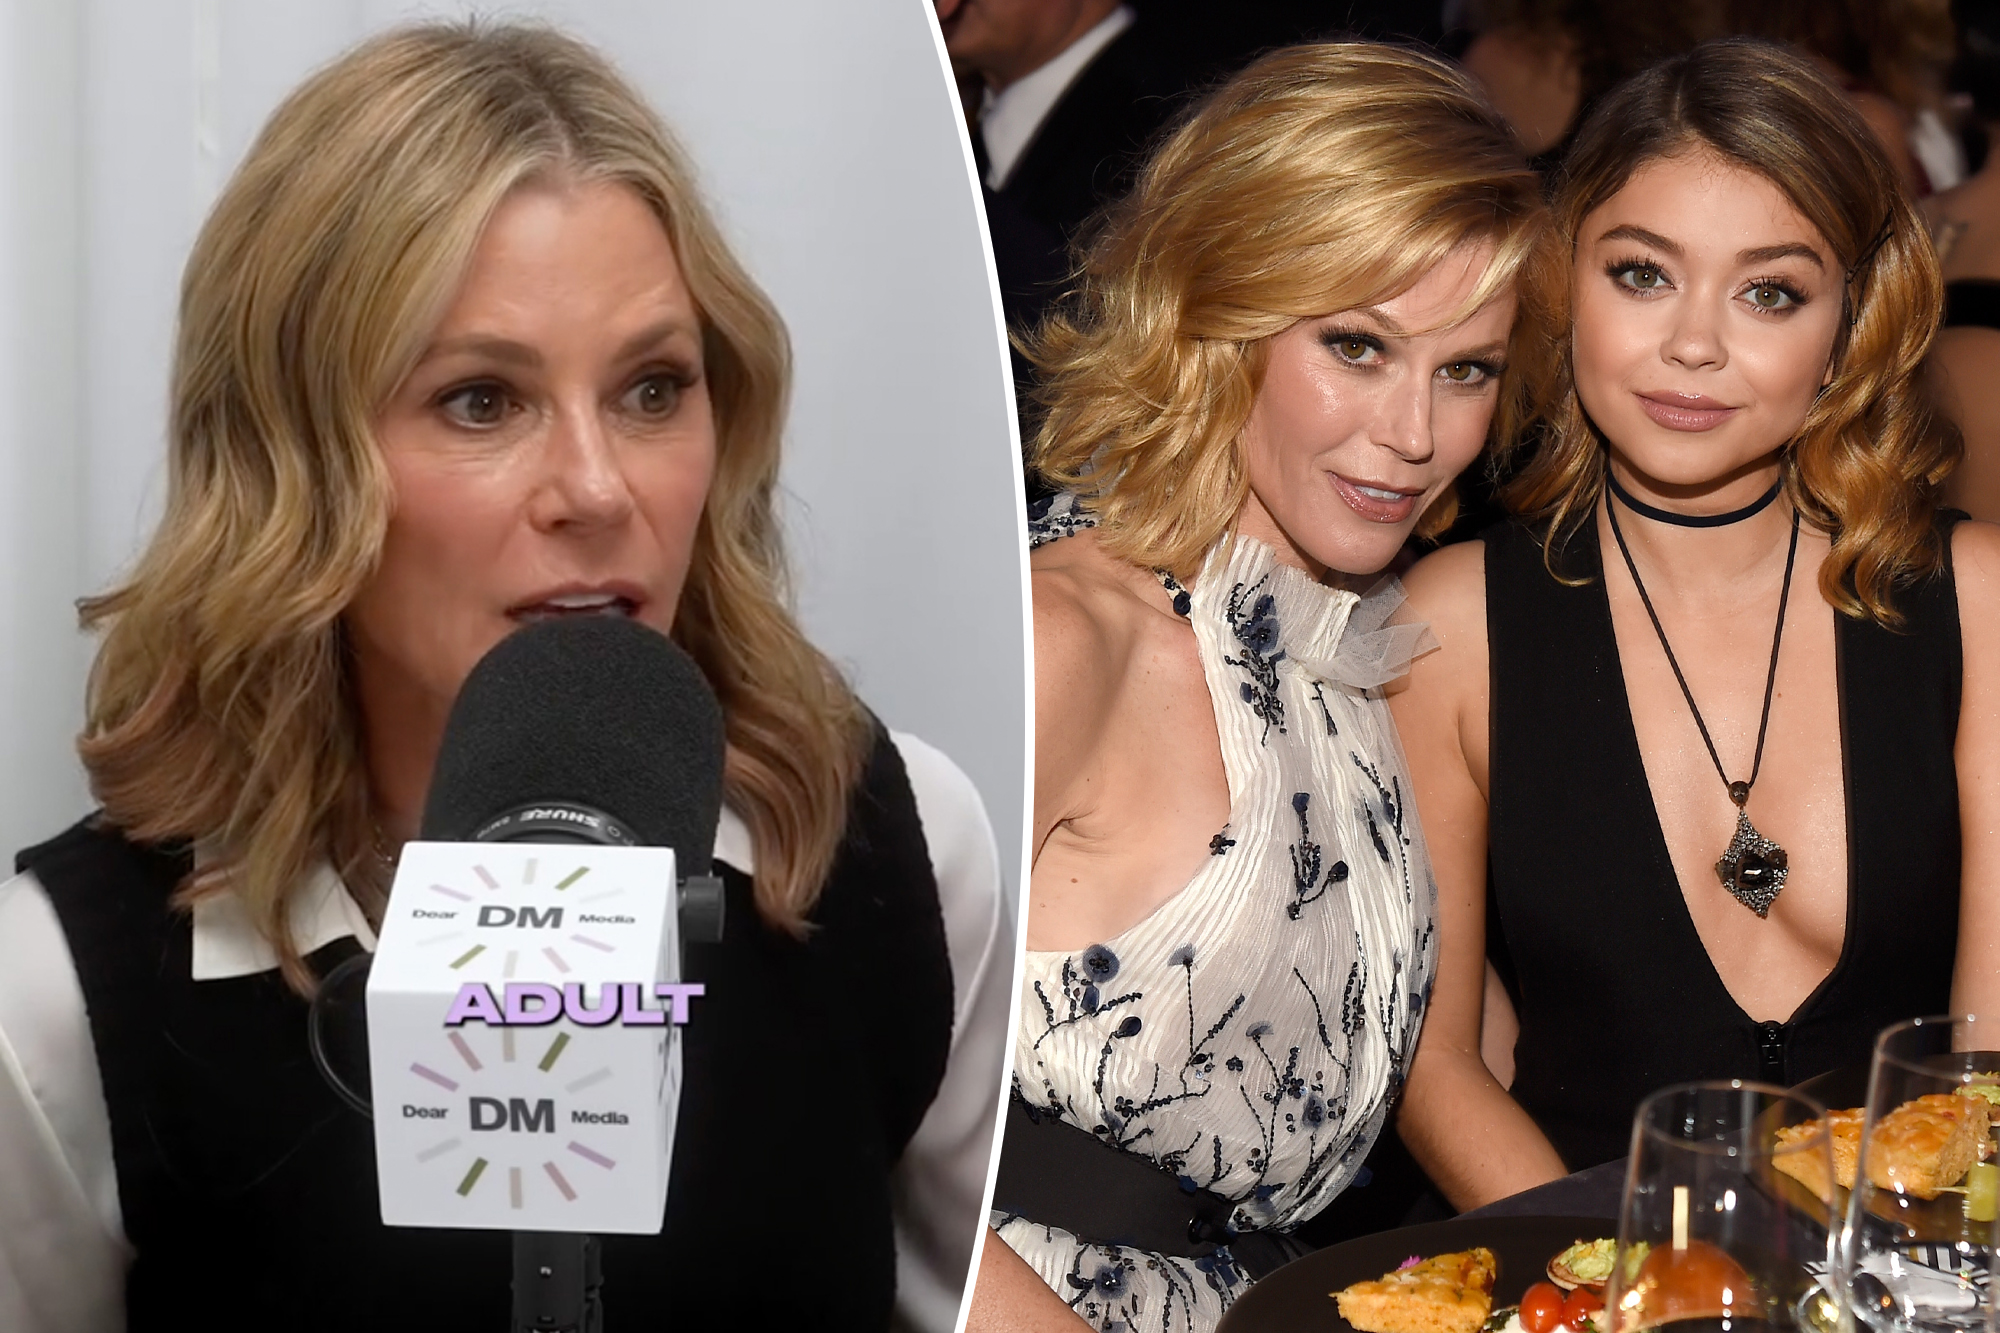 ‘Modern Family’ star Julie Bowen humbly reacts to credit for helping Sarah Hyland leave abusive relationship